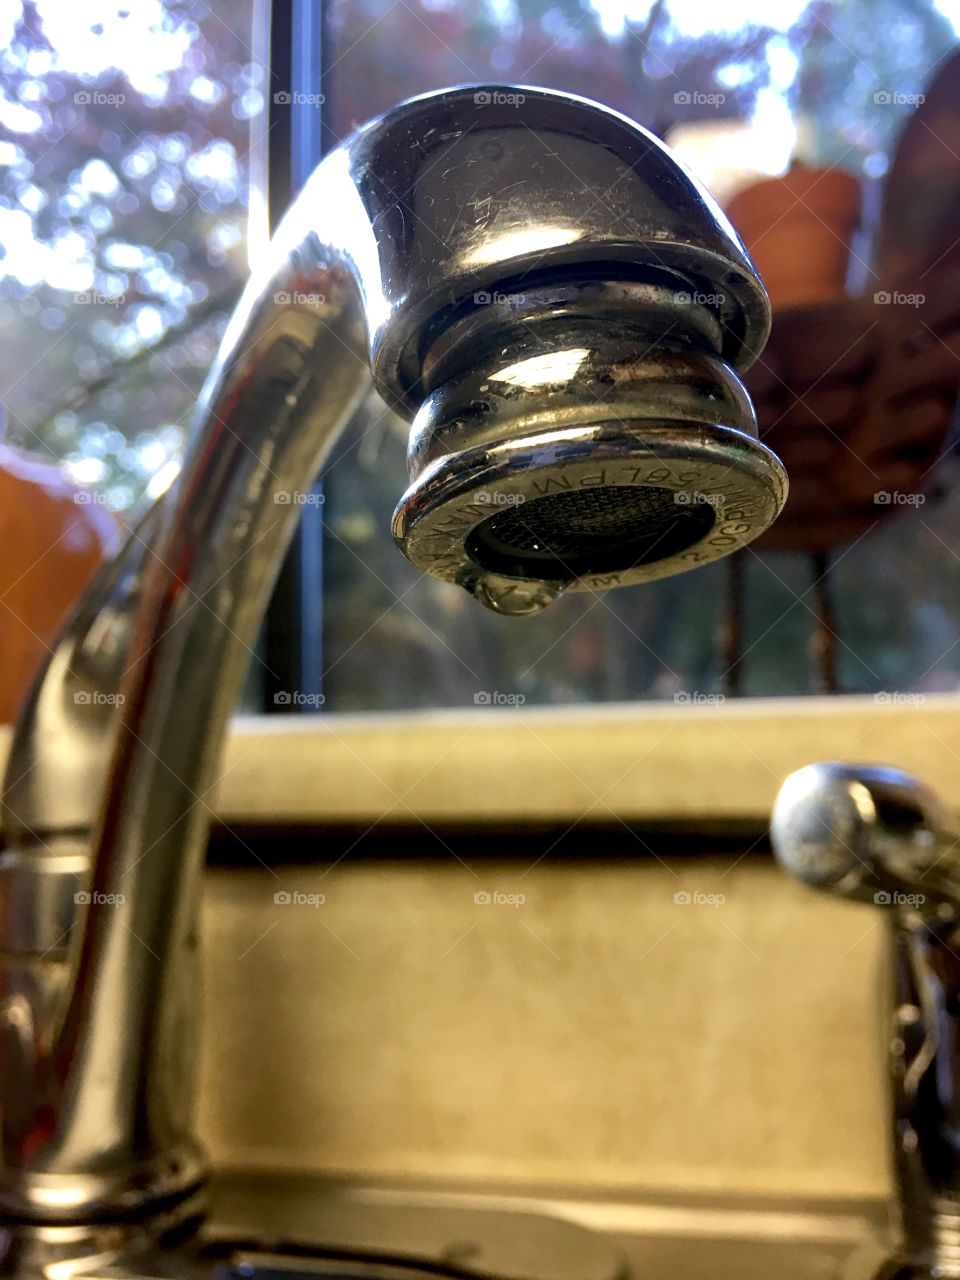 Just a leaky faucet 